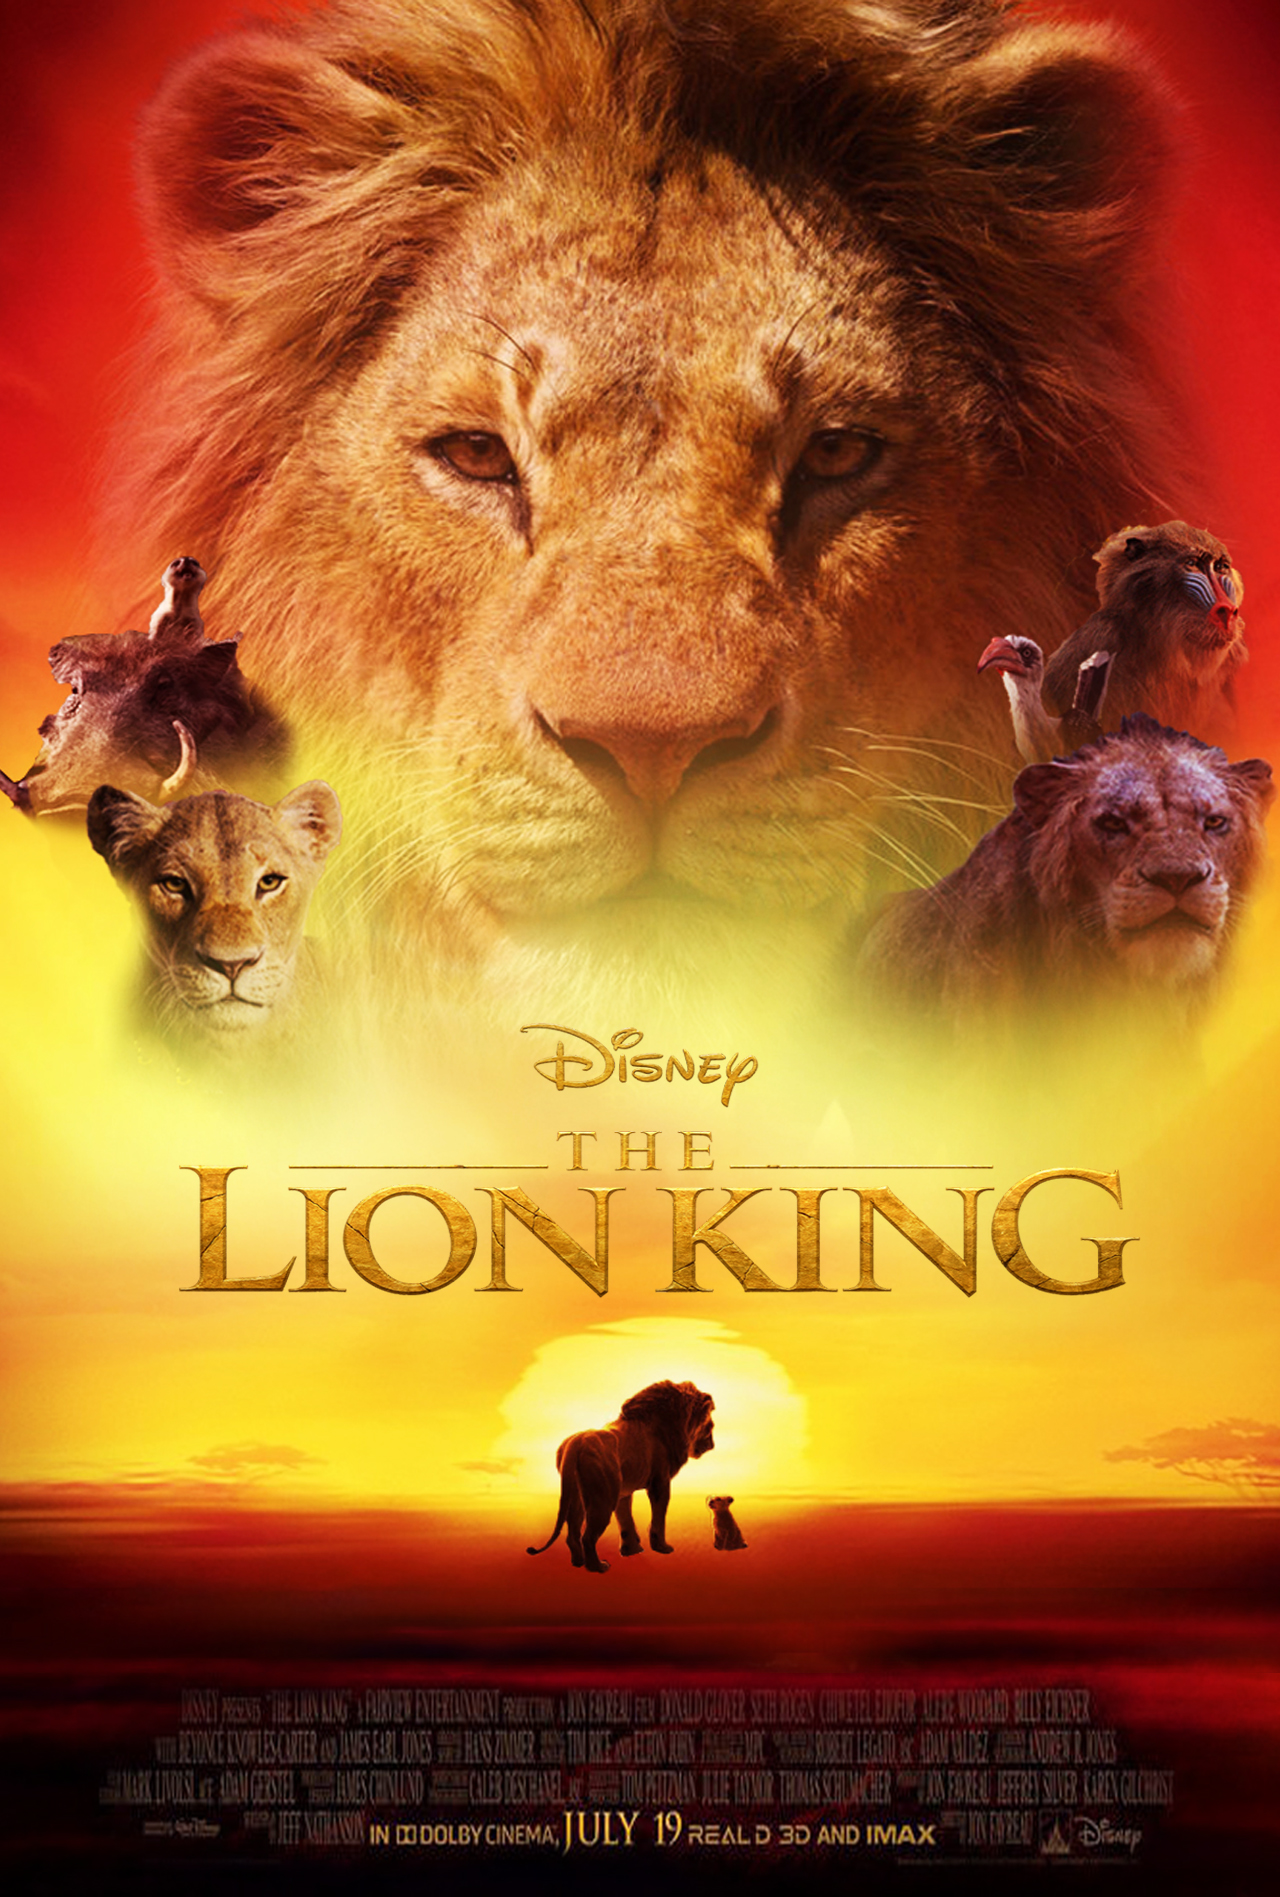 The Lion King 19 Poster By Thekingblader995 On Deviantart